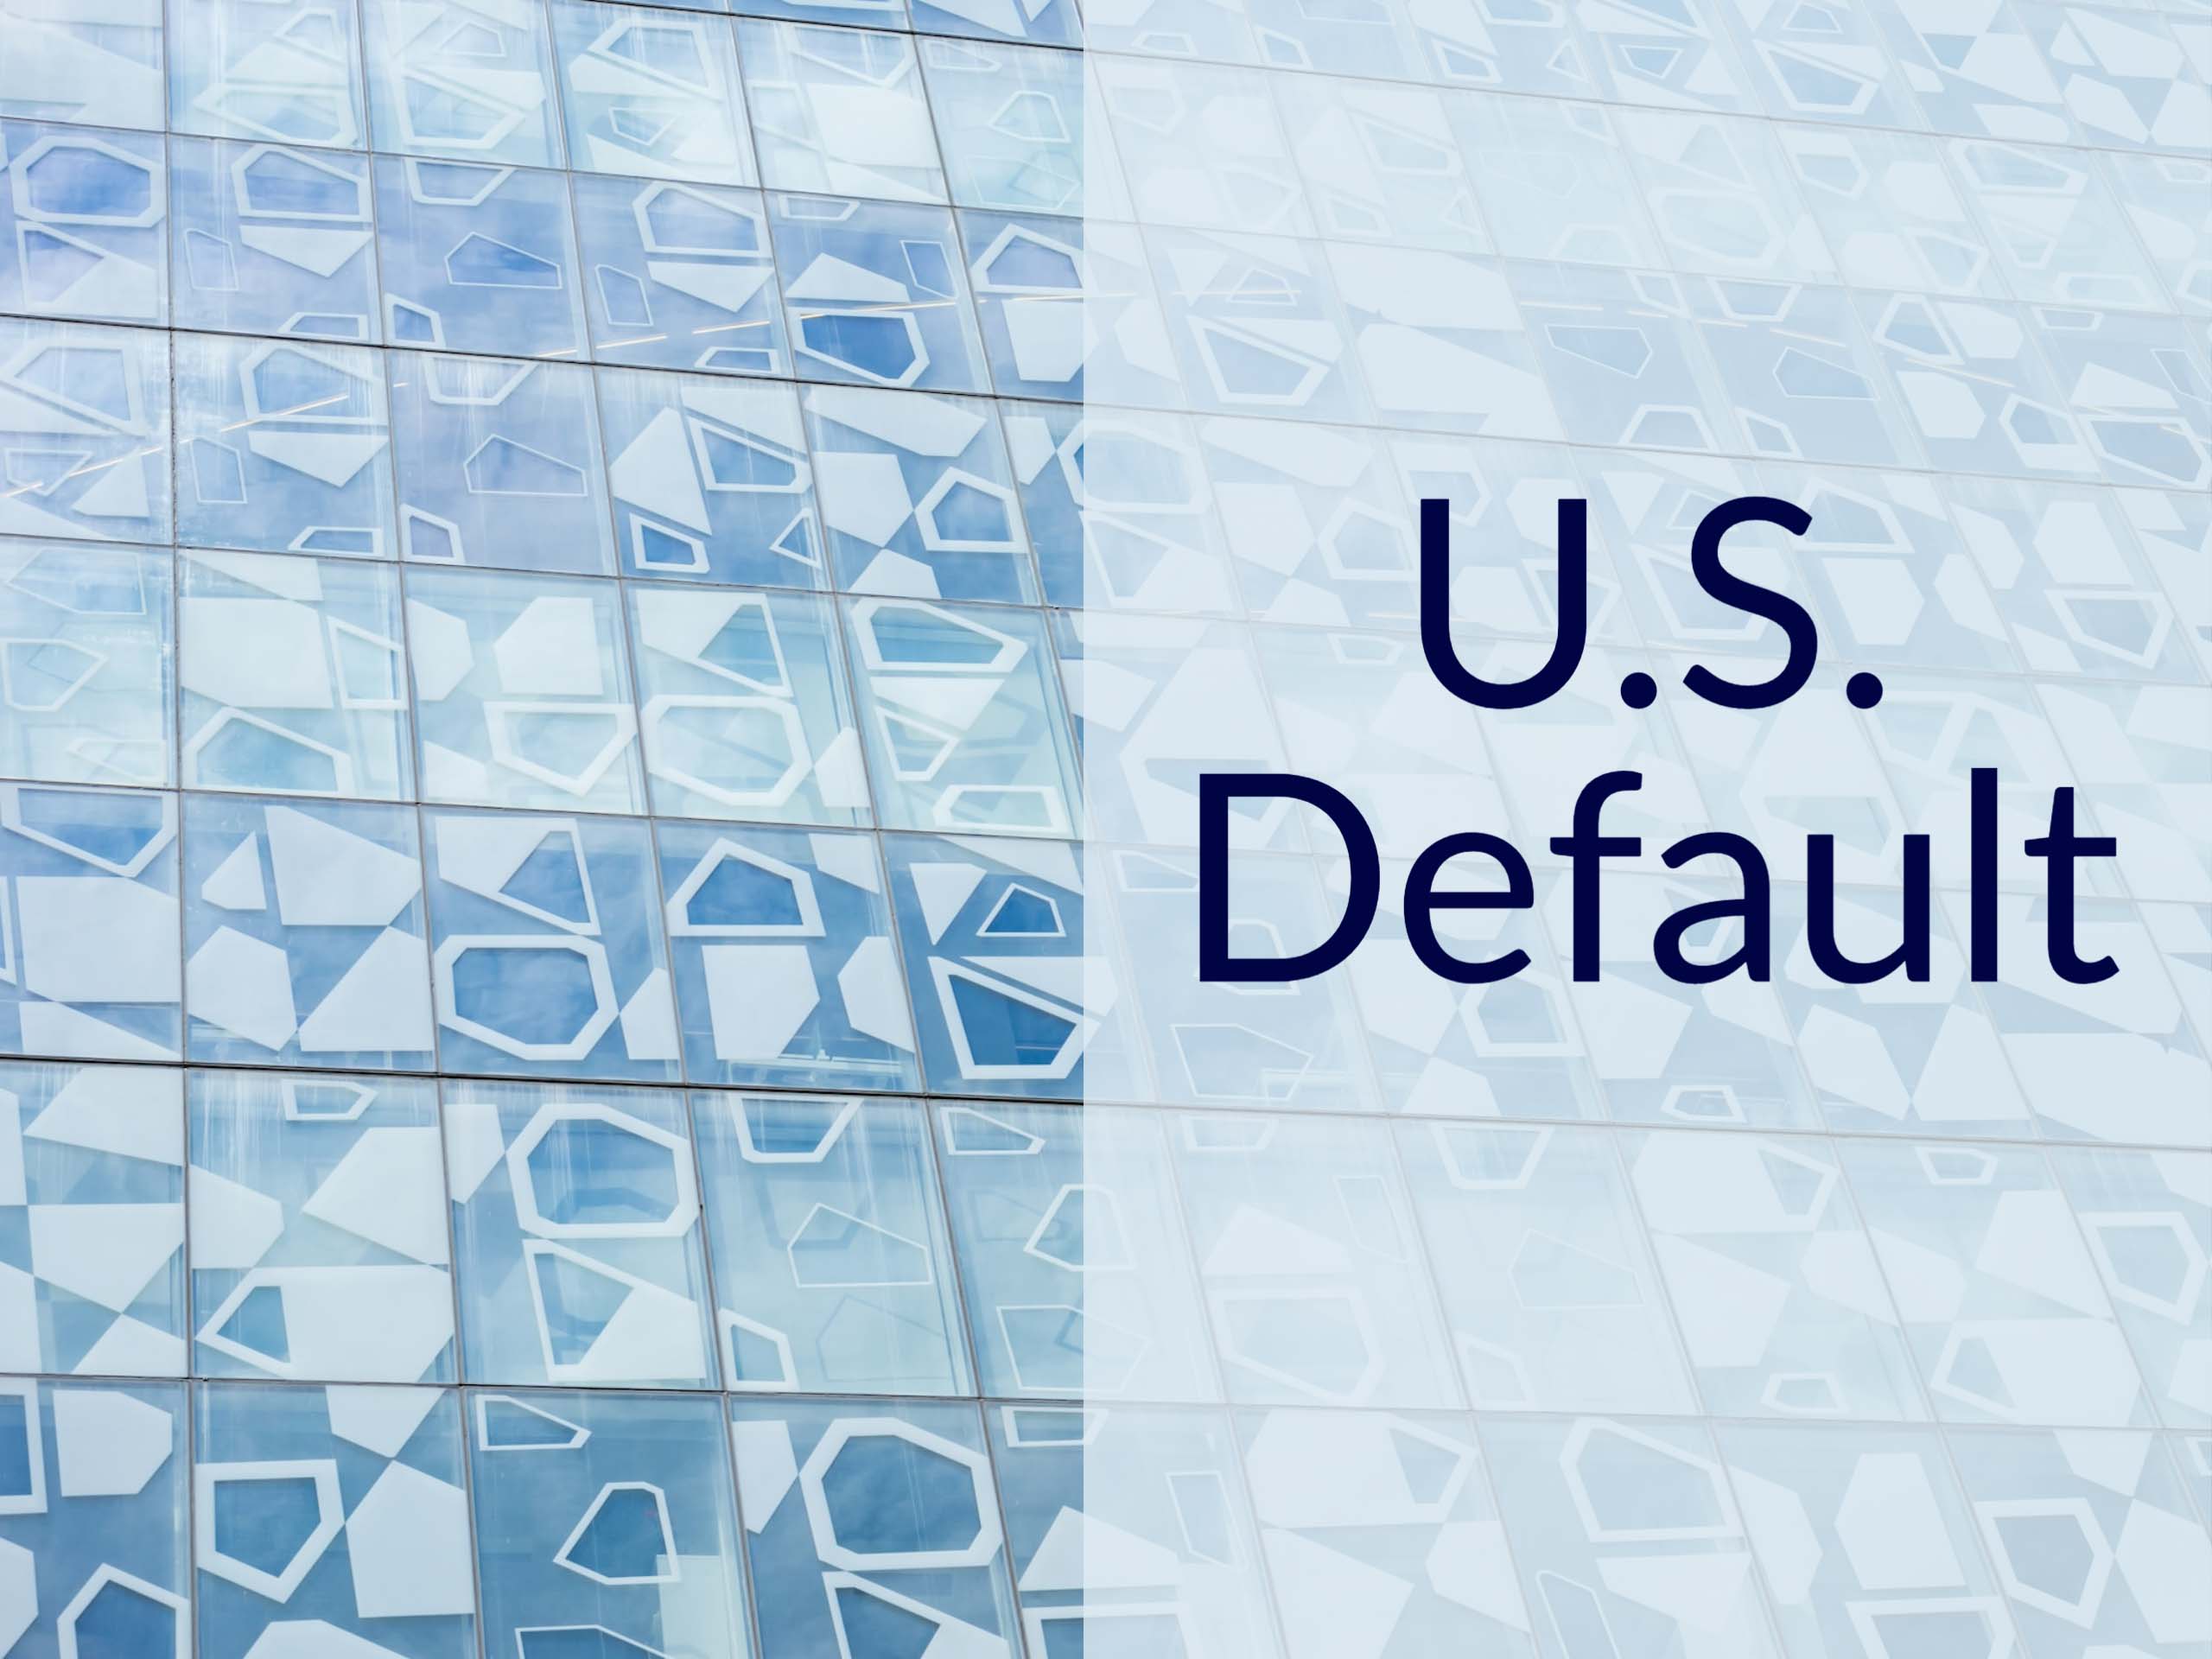 433: What Happens If The U.S. Defaults On Its Debt? Here’s Why It Won’t